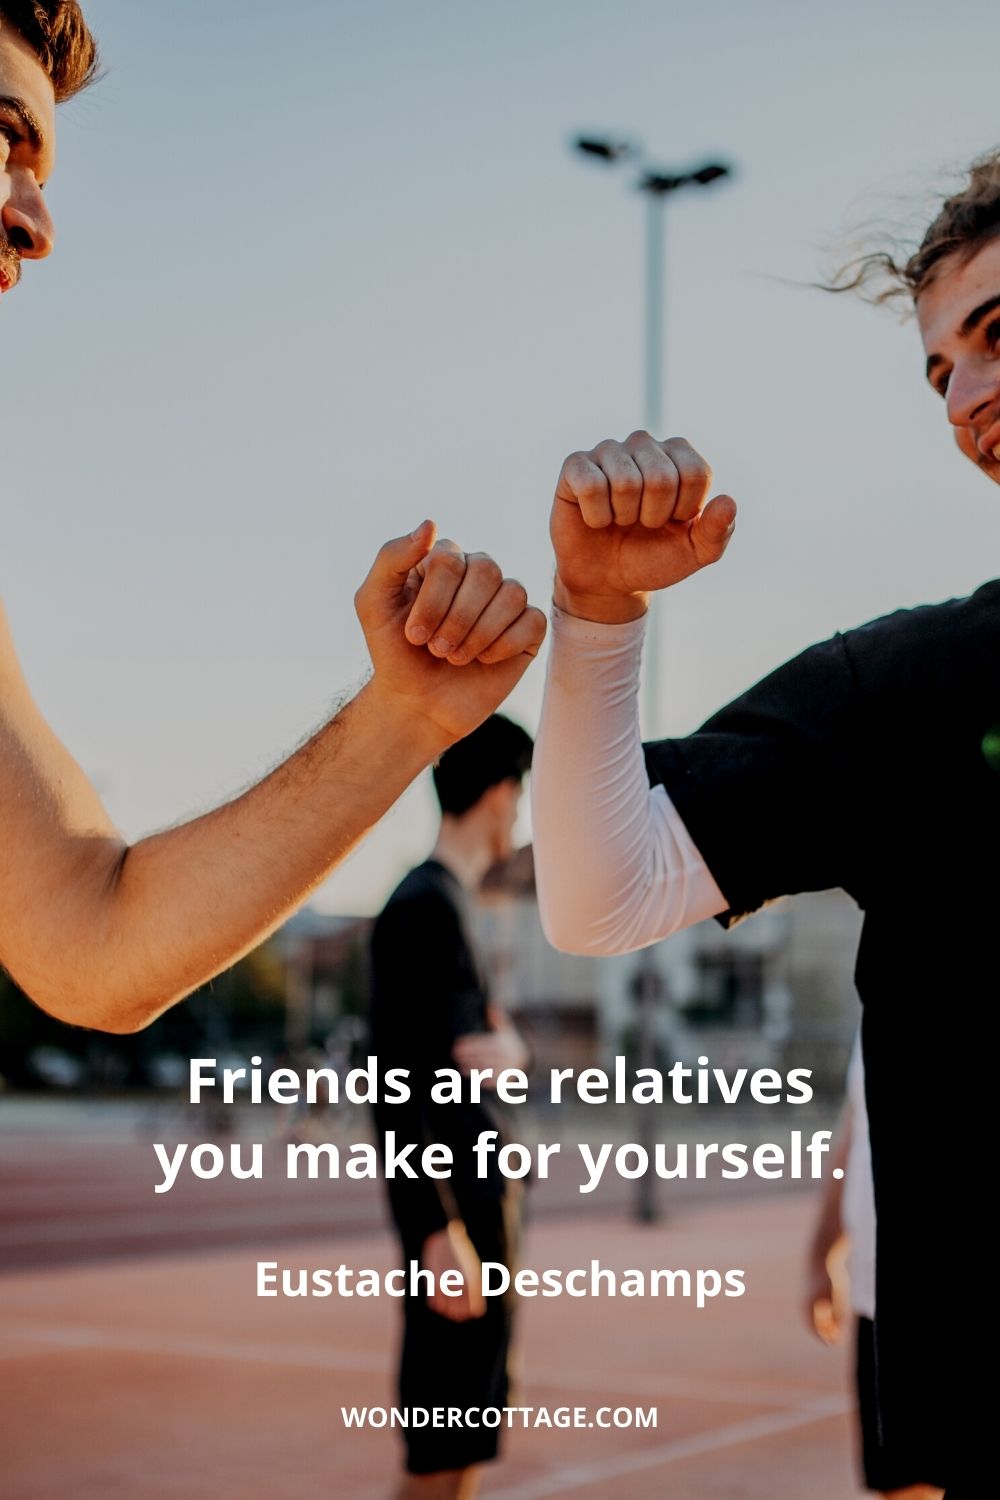 Friends are relatives you make for yourself.